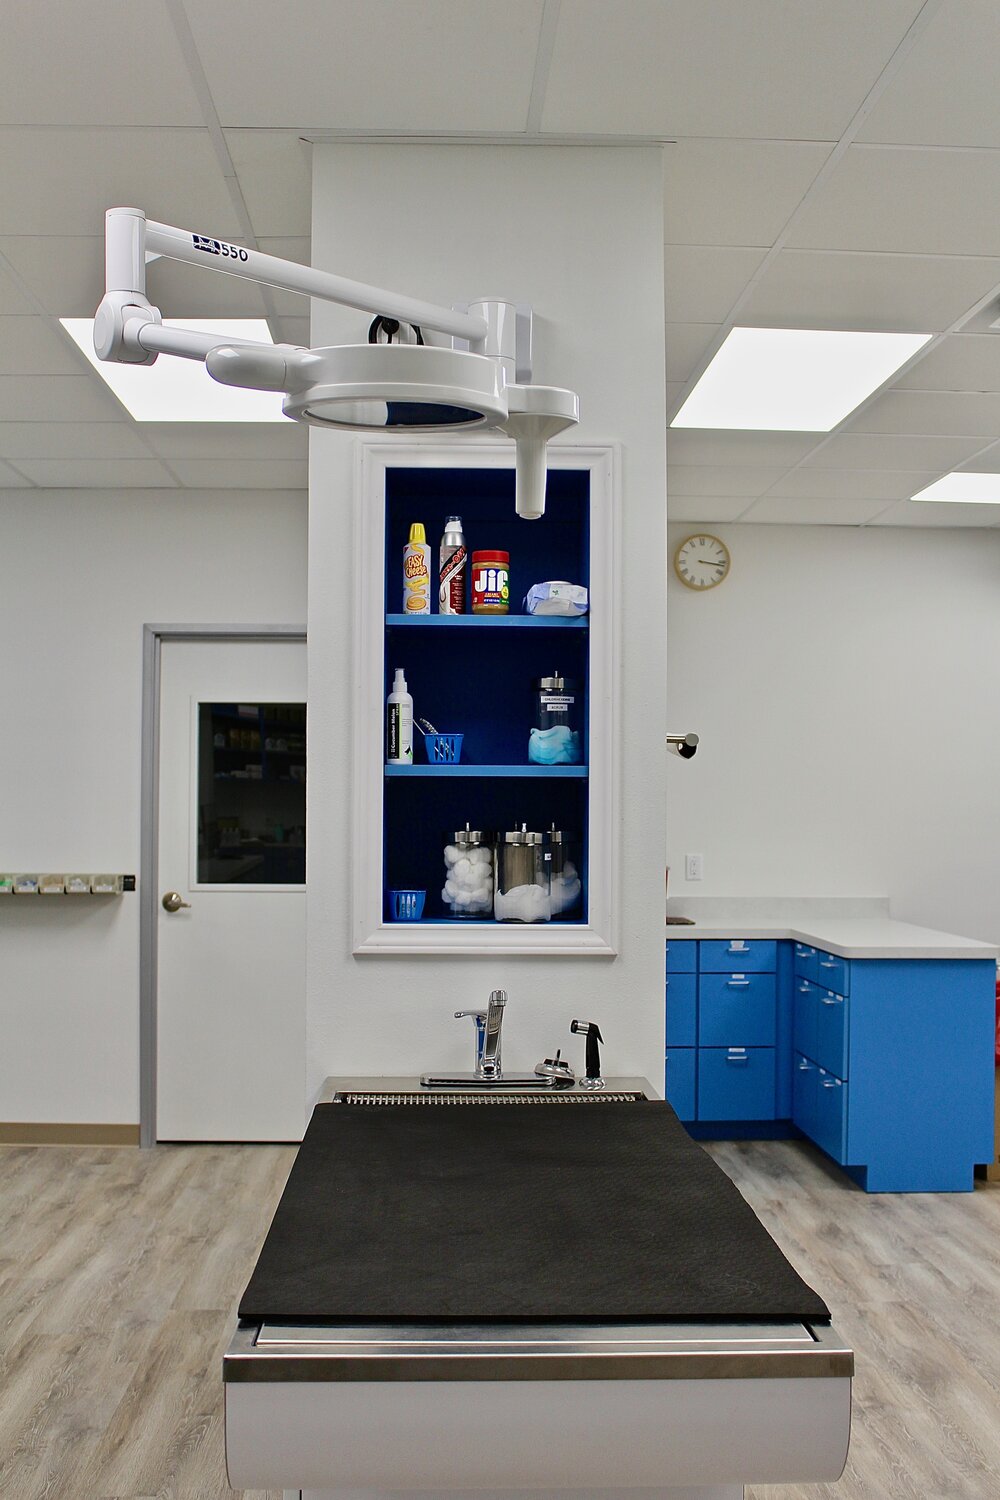 Trail Pet Hospital facility with an examination table